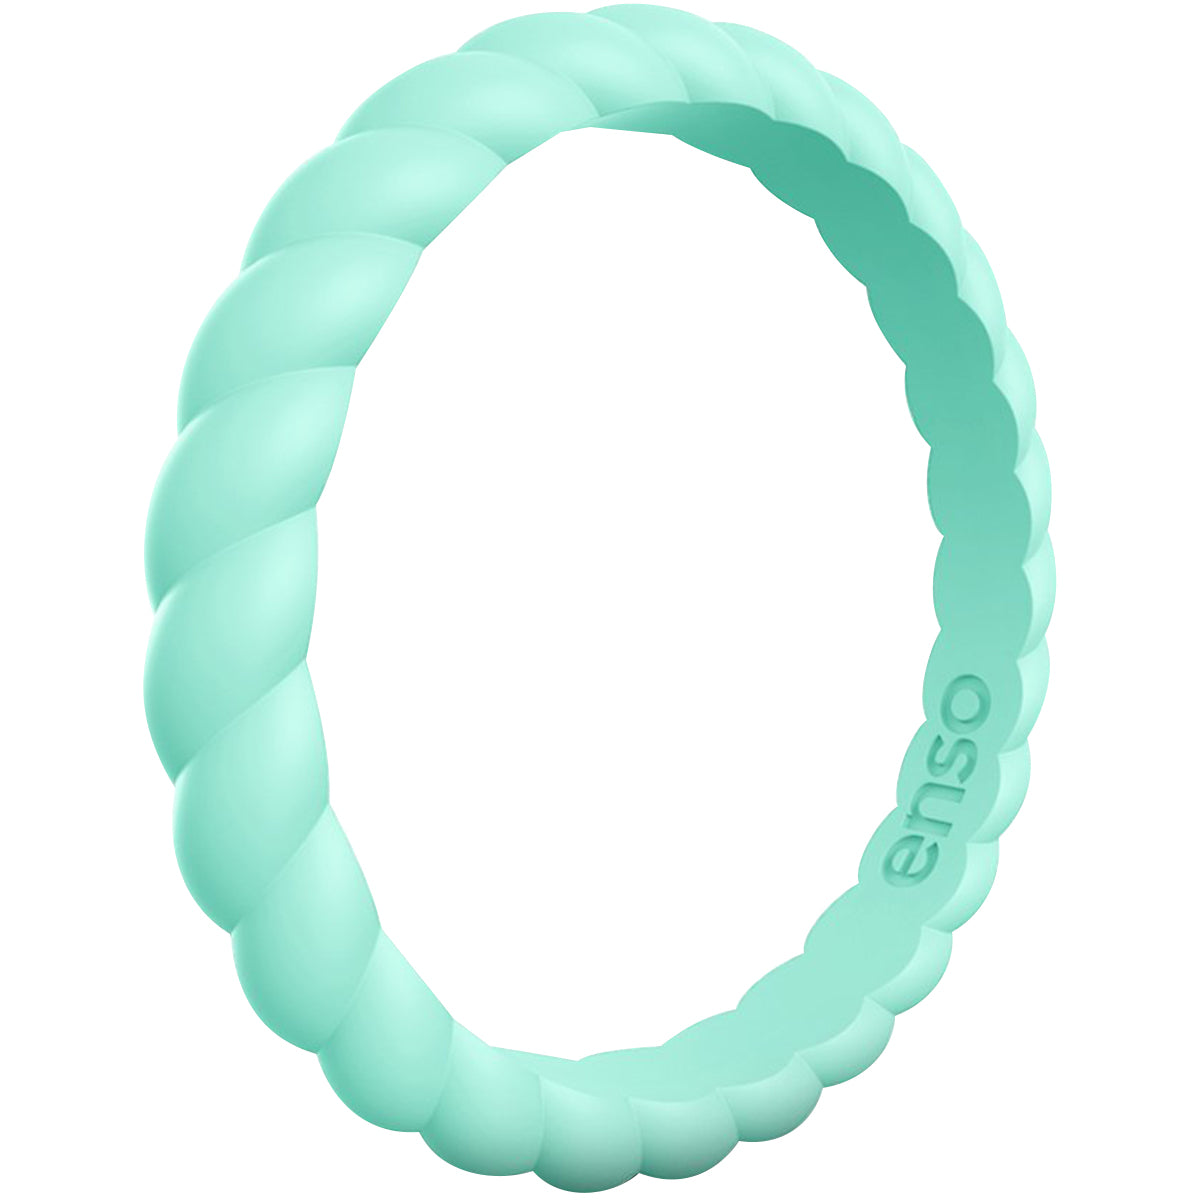 Enso Rings Braided Stackables Series Silicone Ring - Turquoise Enso Rings